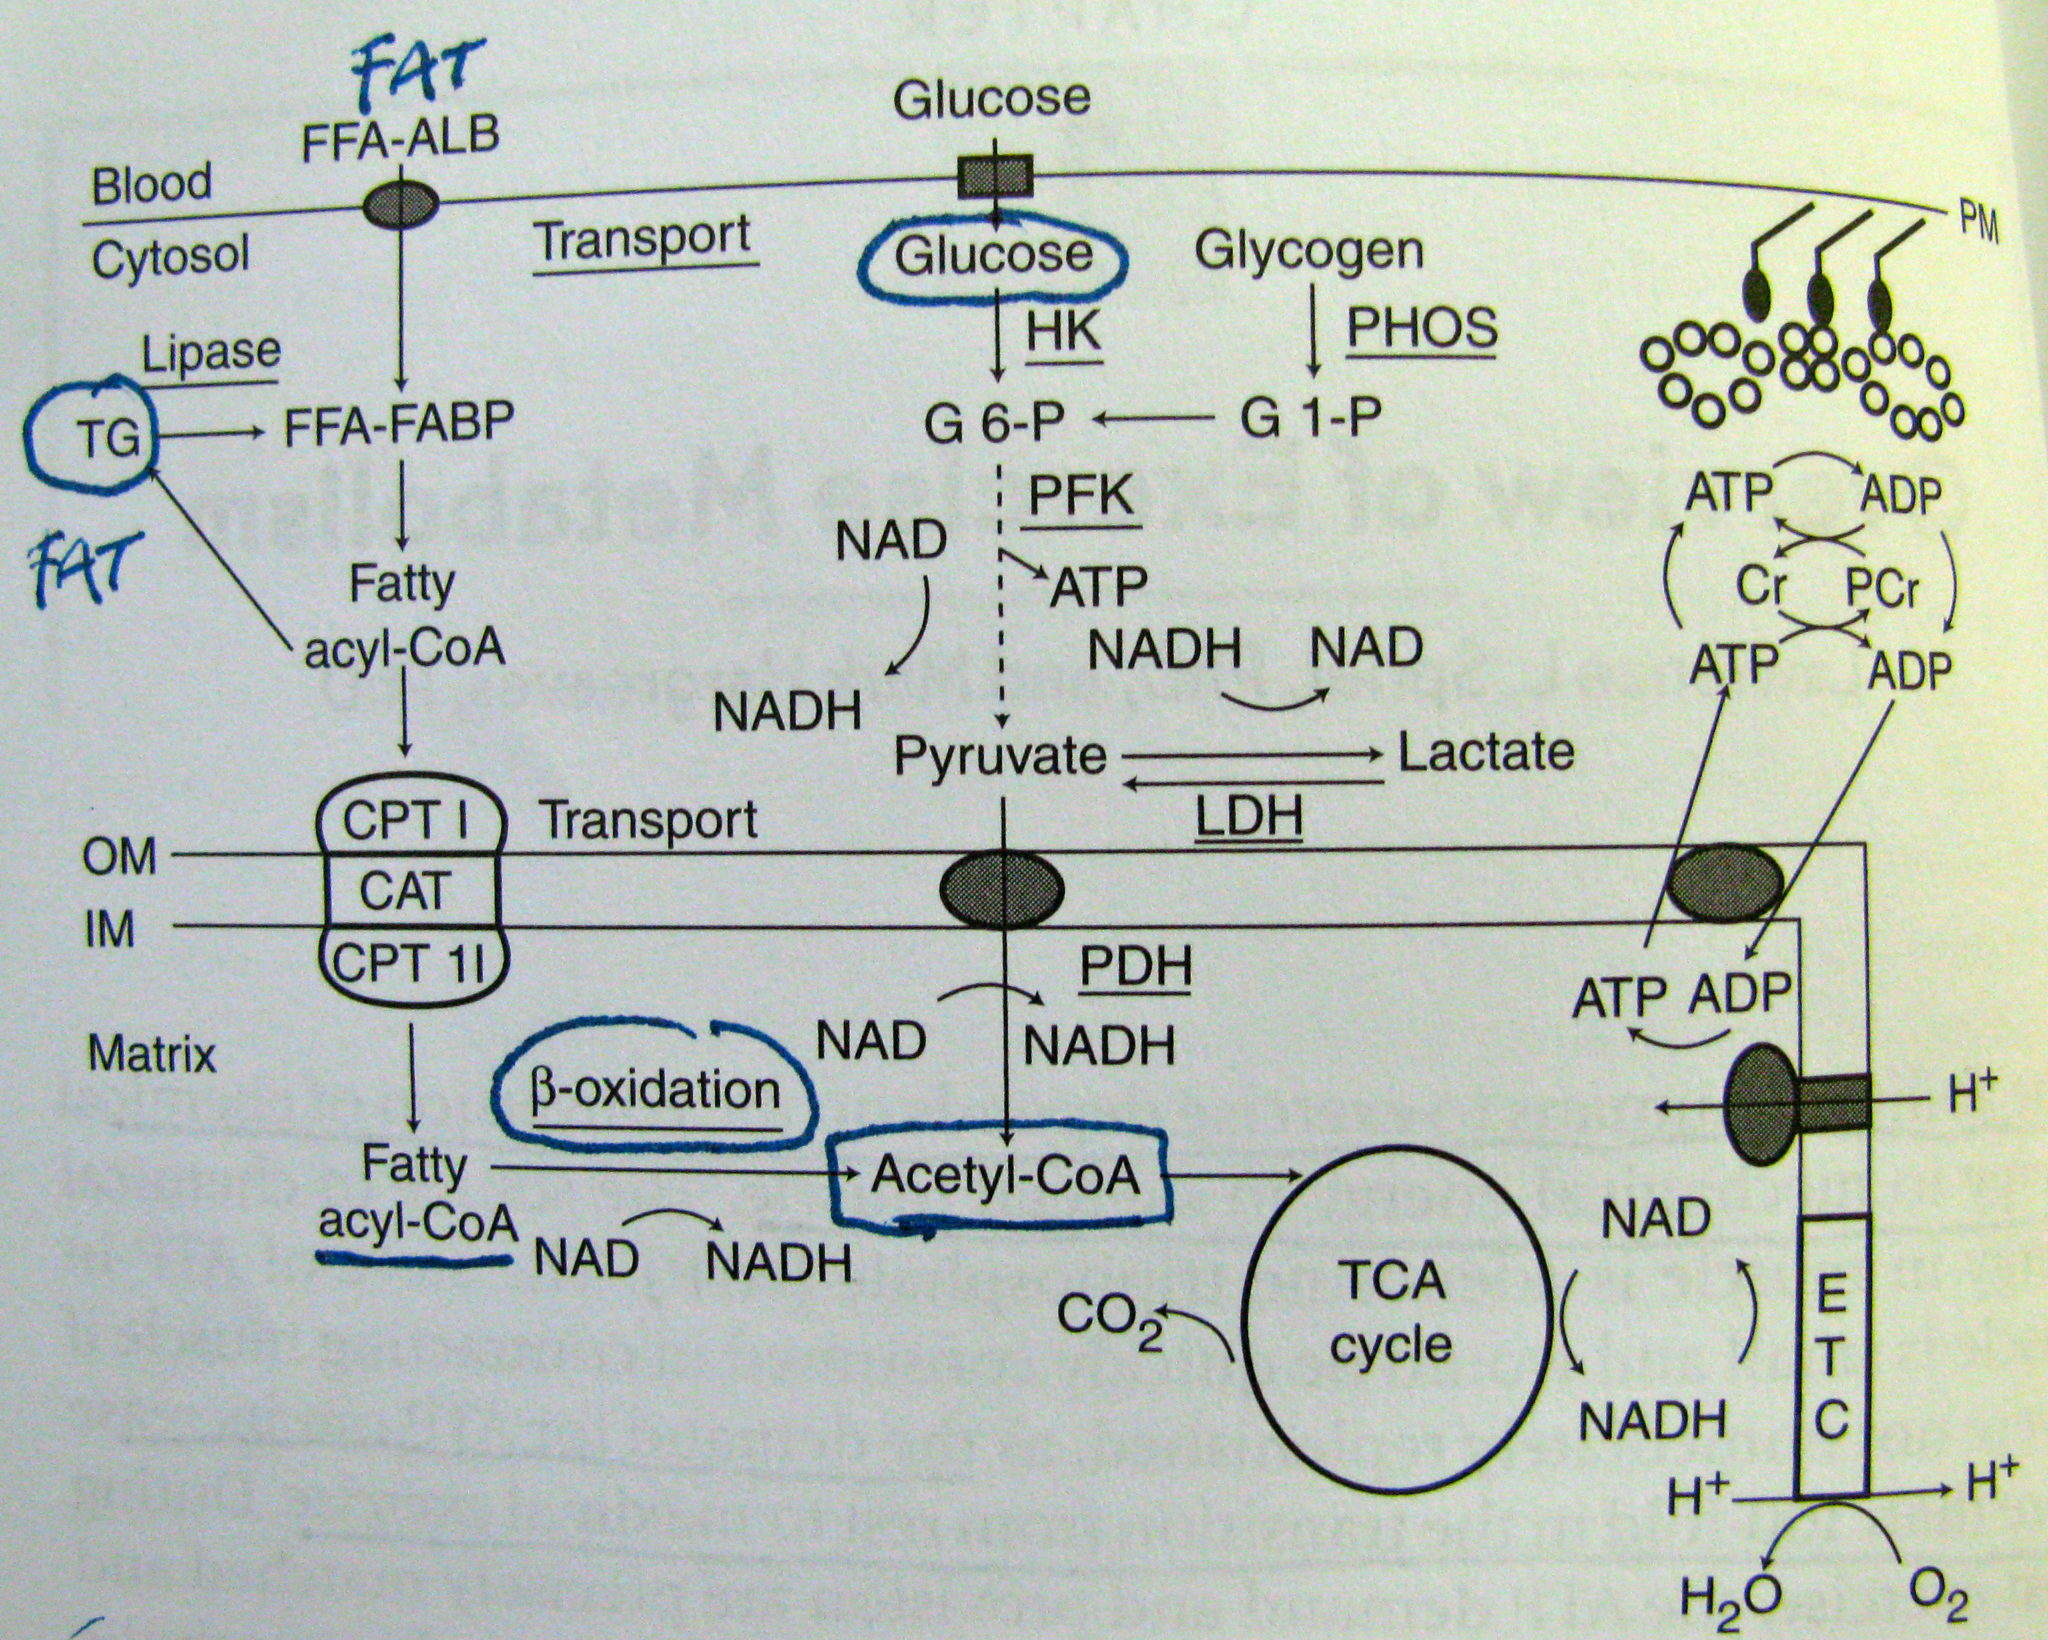 Fats (left) and glucose (middle) both are converted into Acetyl-CoA (square) that the body uses to propel metabolism. Glucose, provided by carbohydrates, is converted much quicker to usable energy that fats. Spriet et al 1999.